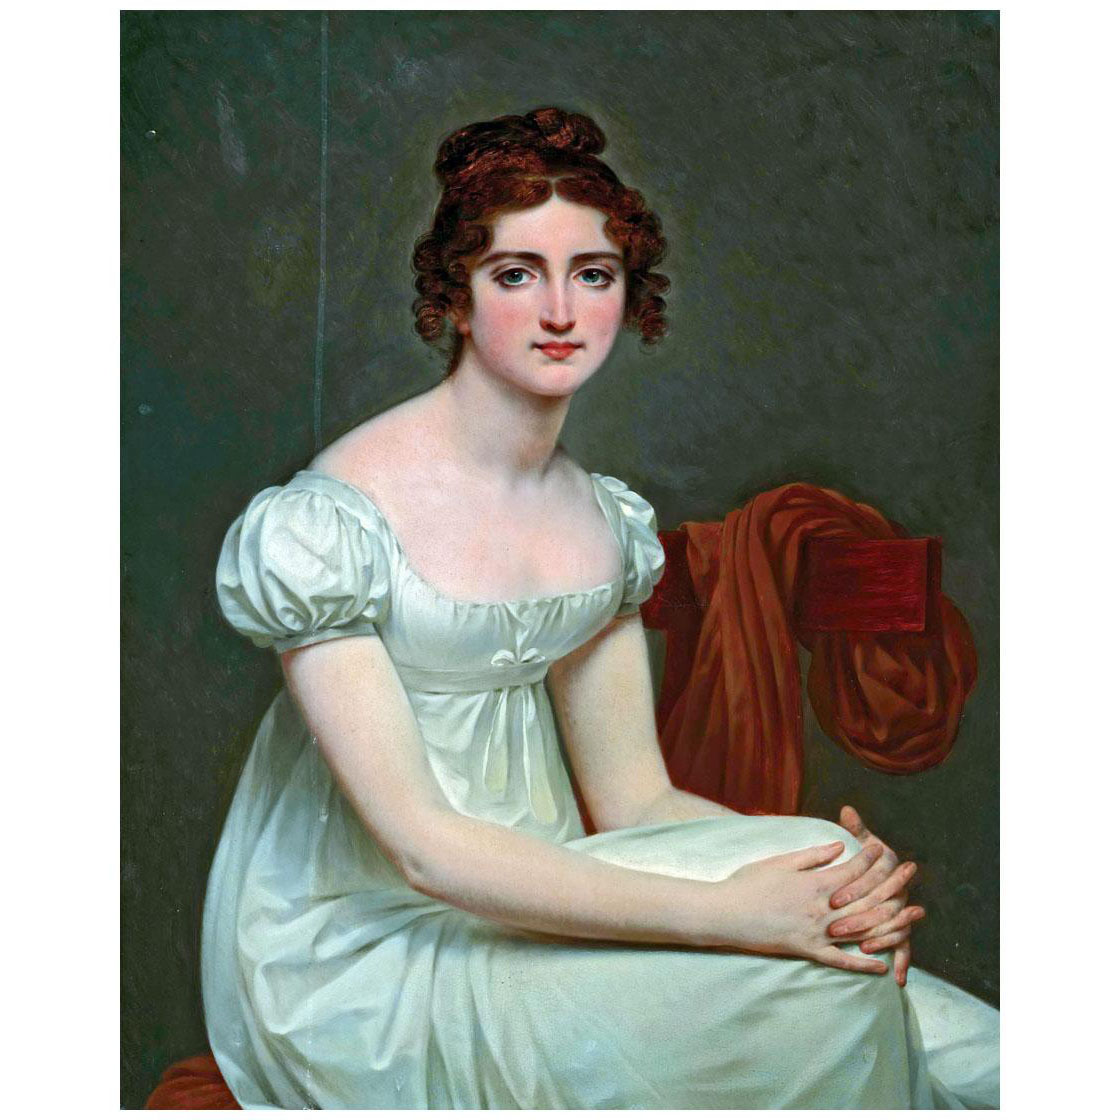 Antoine-Jean Gros. Charlotte Helene Pauline Dessolles. 1830. Private collection